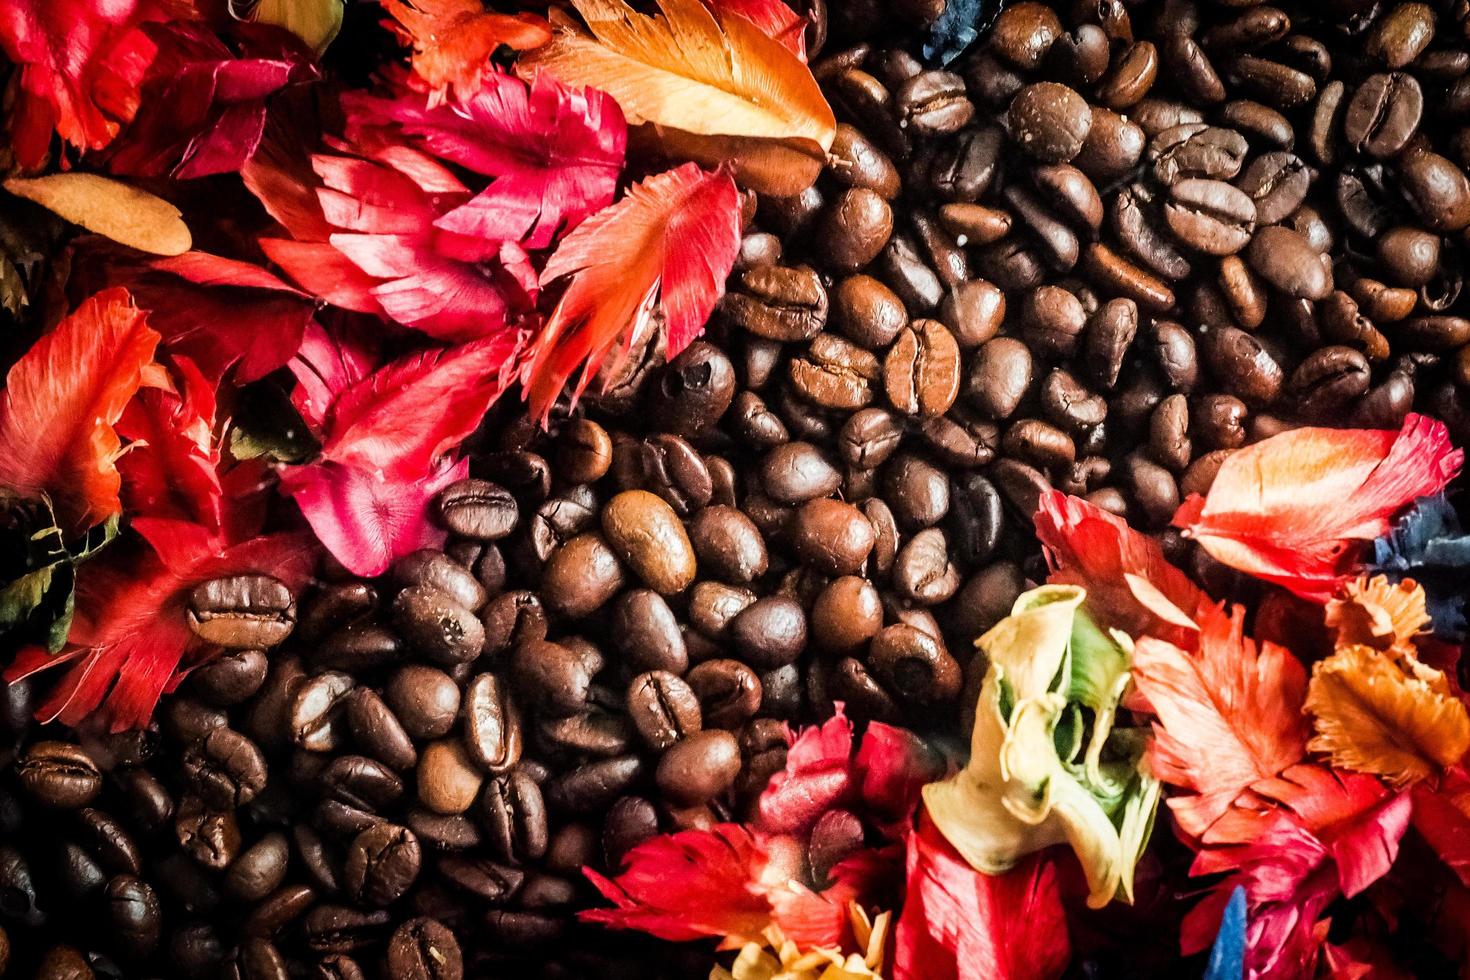 The background image is made of coffee beans decorated with flowers. background concept for coffee shop photo